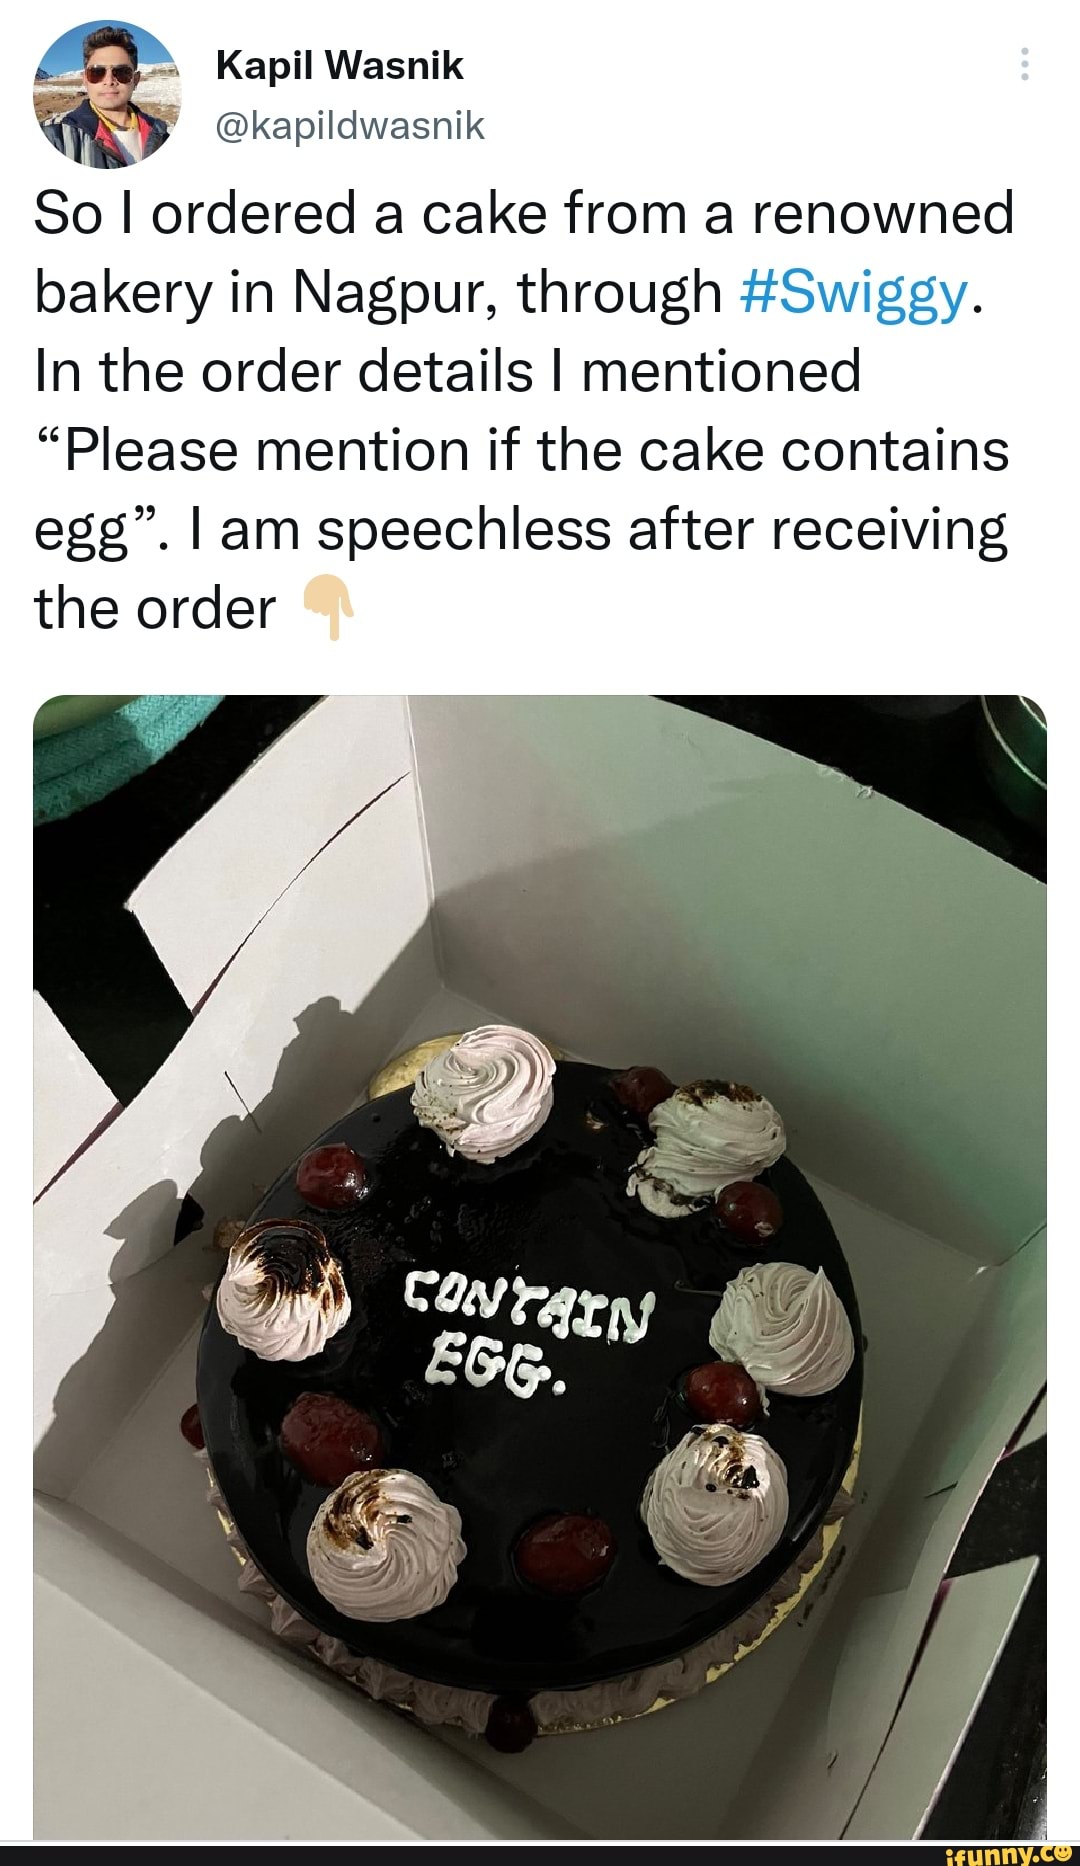 11-Yr Kid Orders Cake From Swiggy, Later Gets To Know The Shop Does Not  Even Exist - RVCJ Media